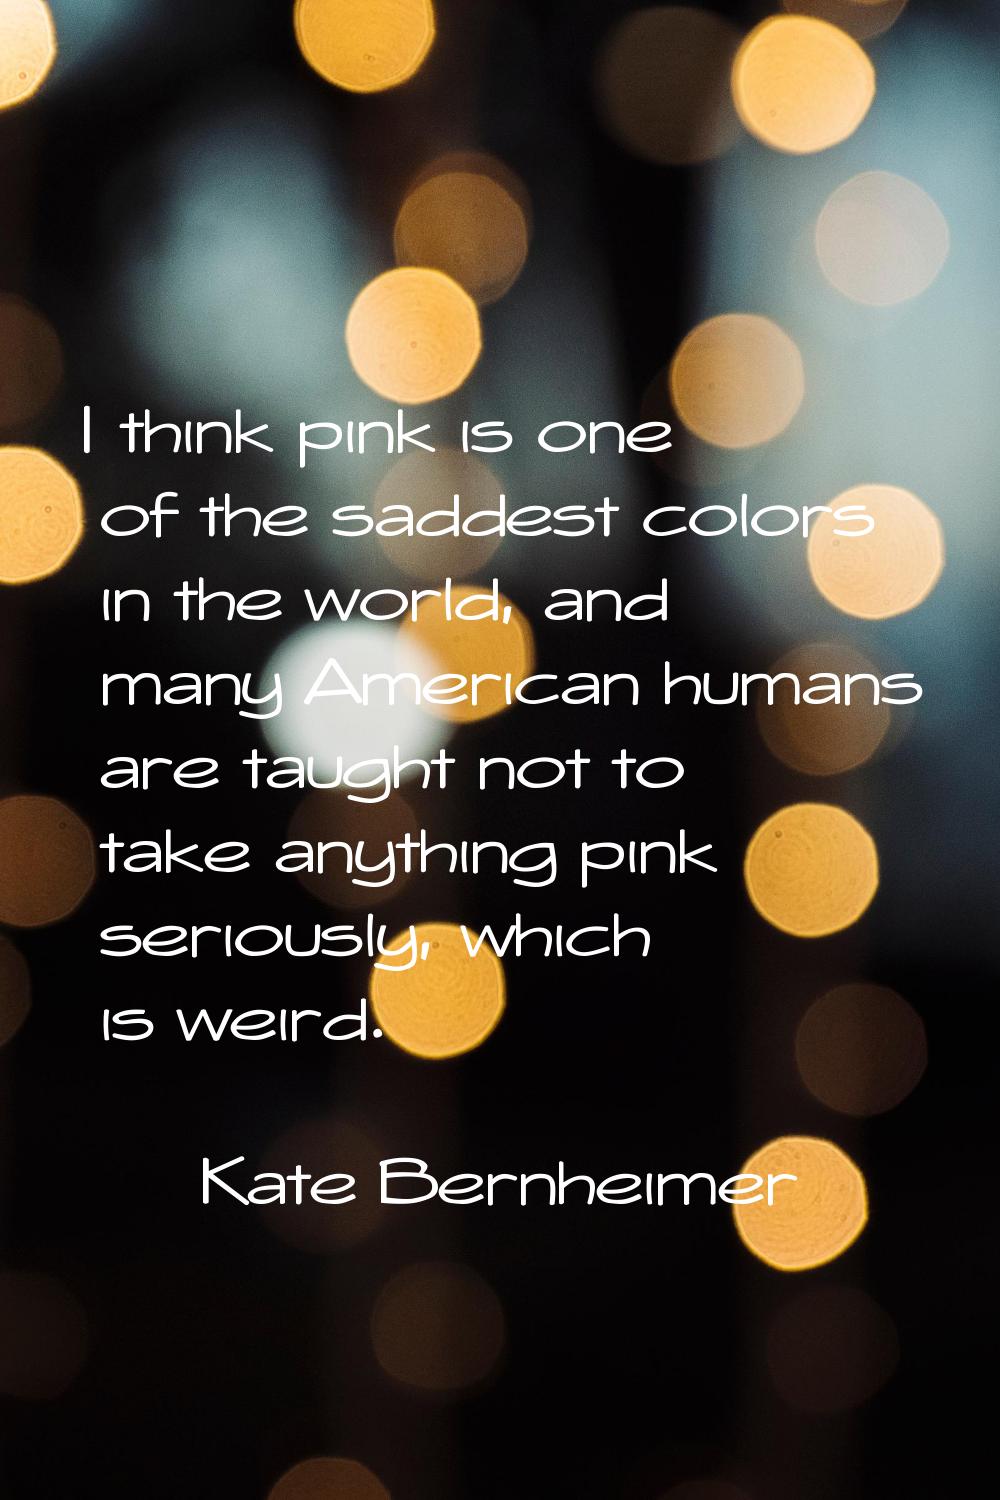 I think pink is one of the saddest colors in the world, and many American humans are taught not to 